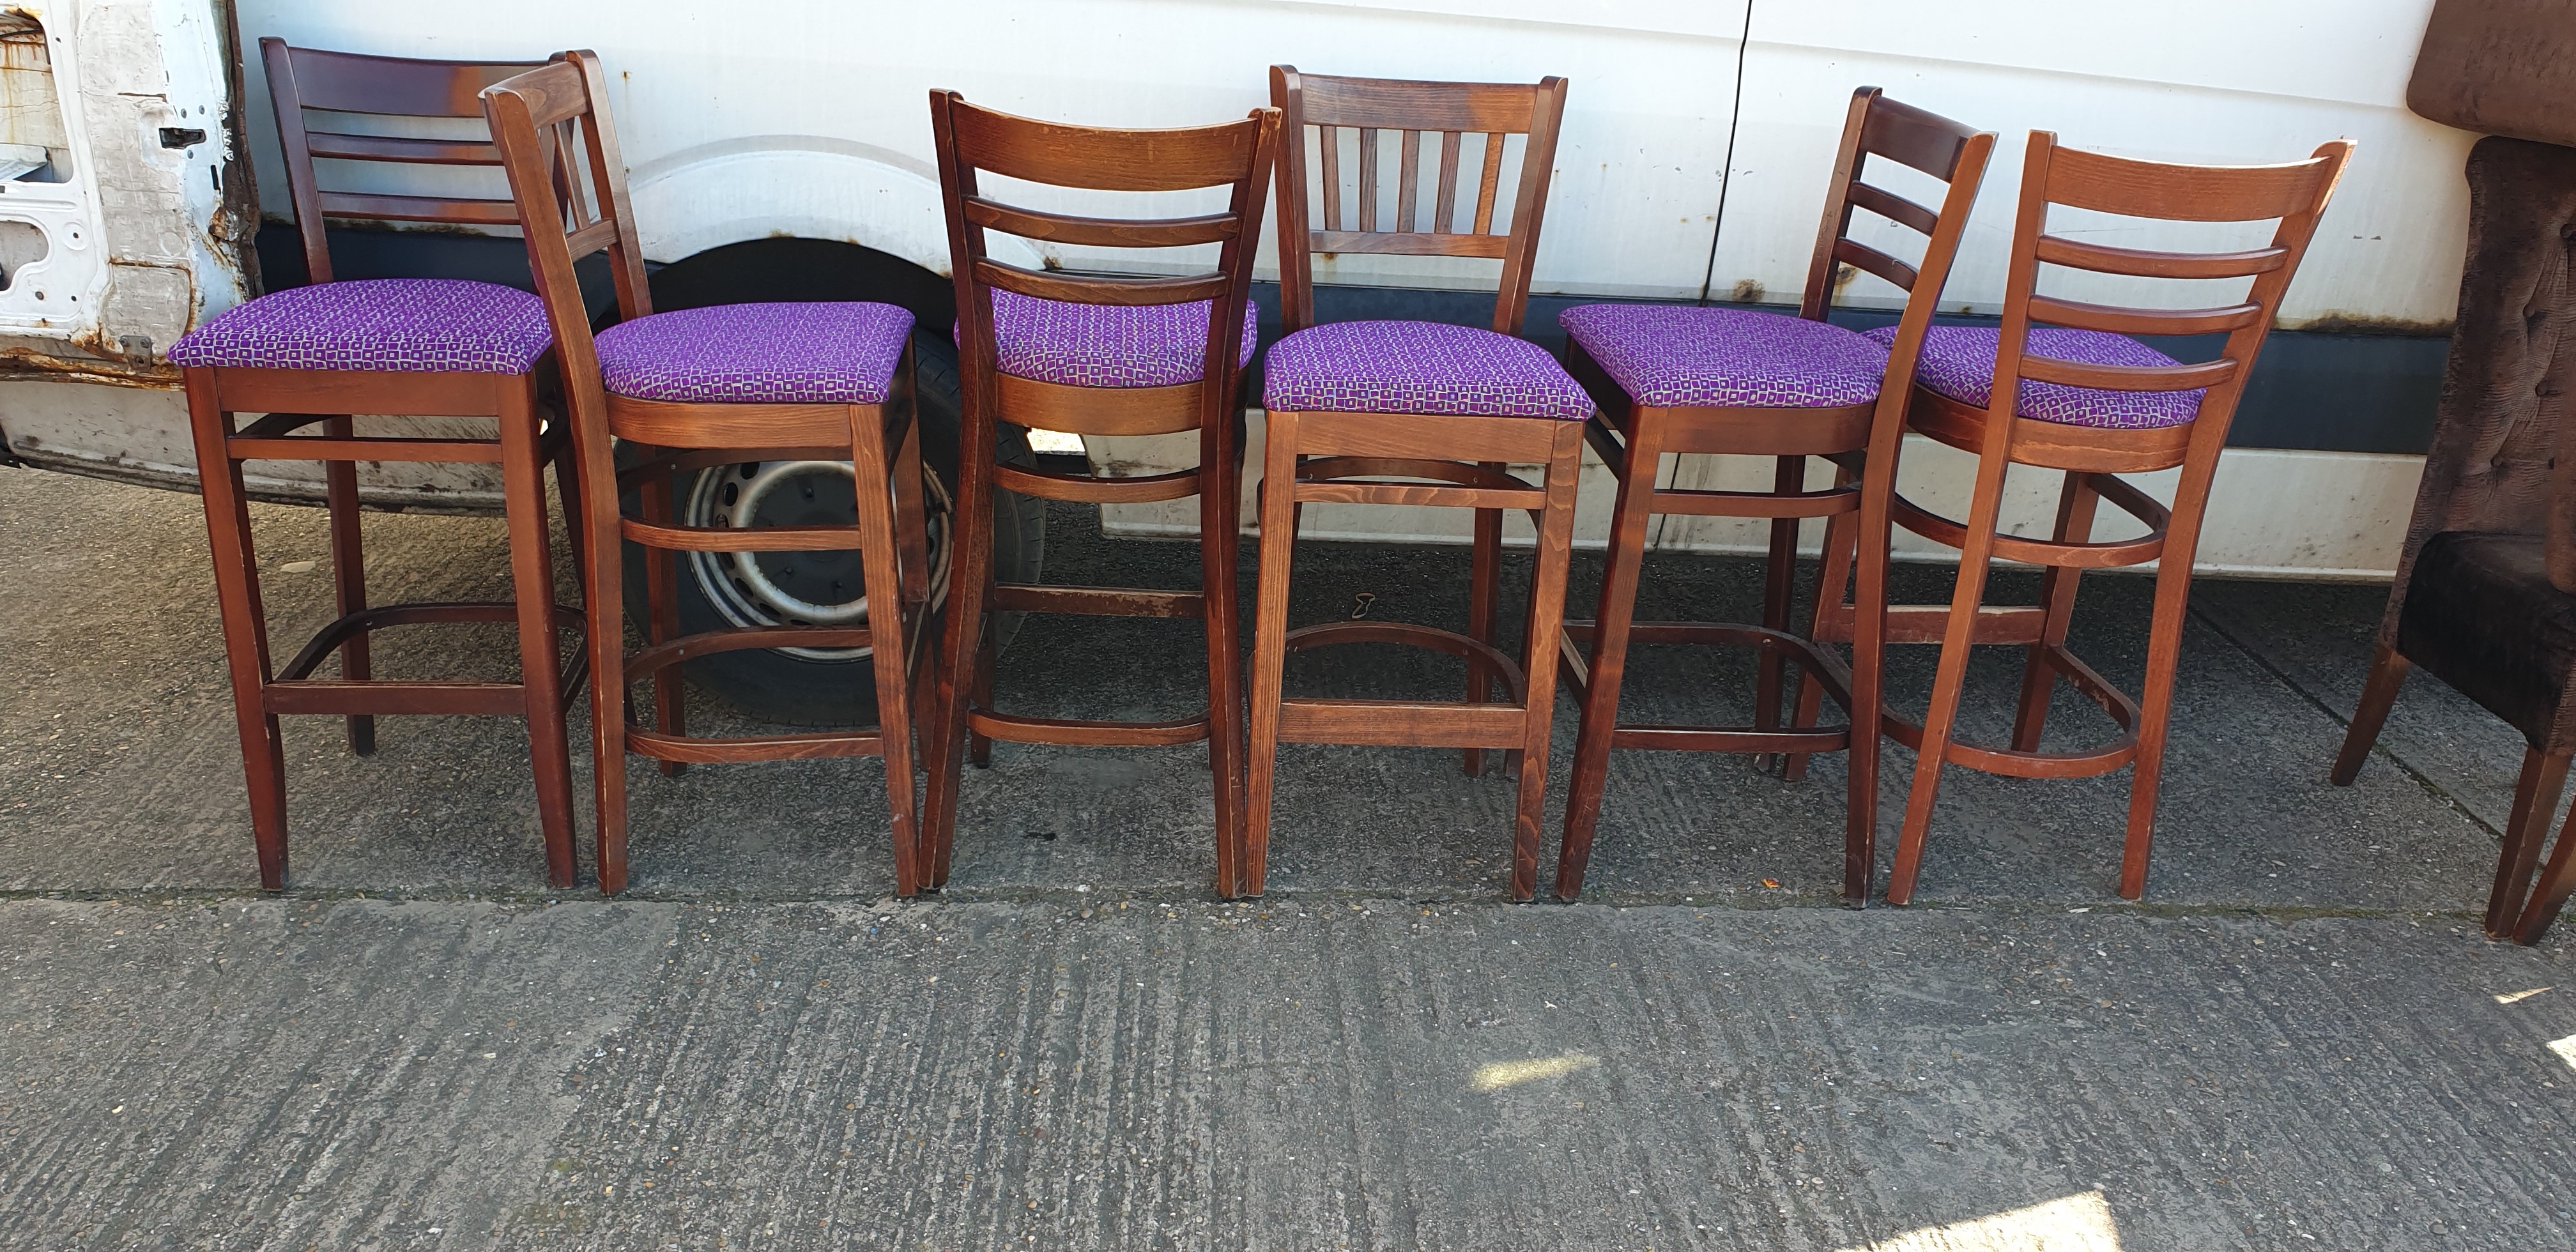 Secondhand Chairs And Tables Restaurant Chairs 6x High Bar